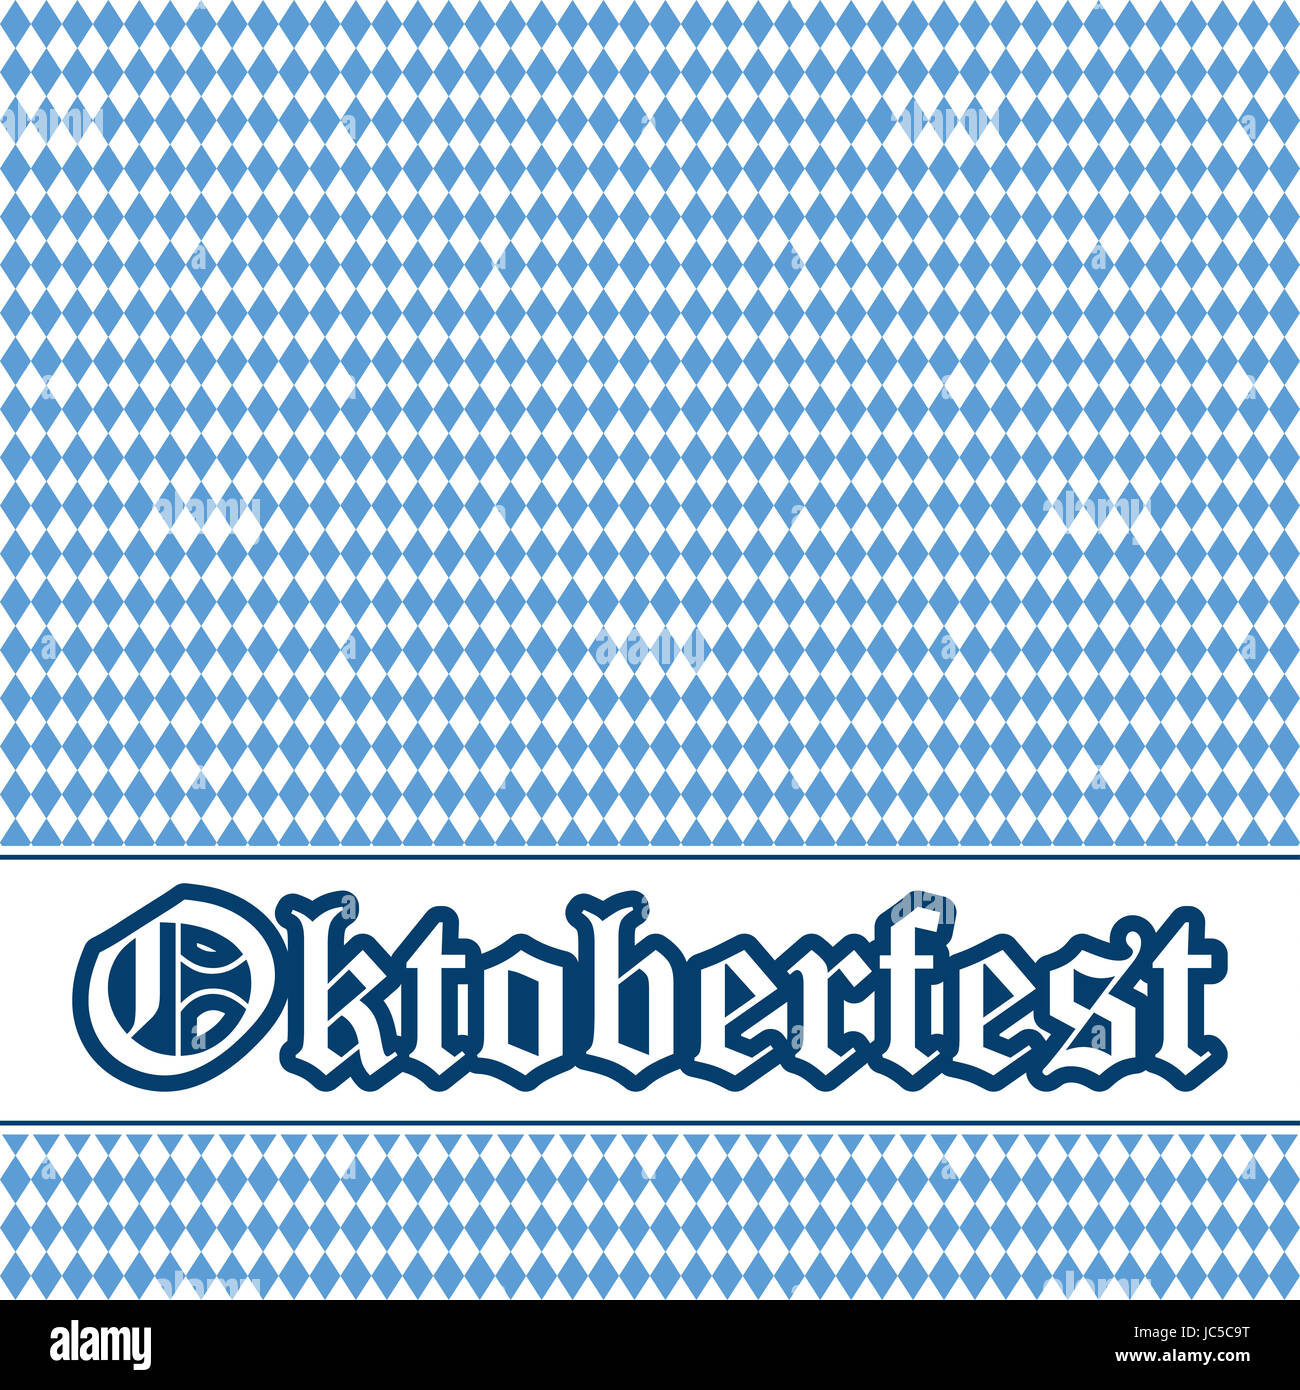 vector of Oktoberfest background with banner and text Oktoberfest Stock Photo